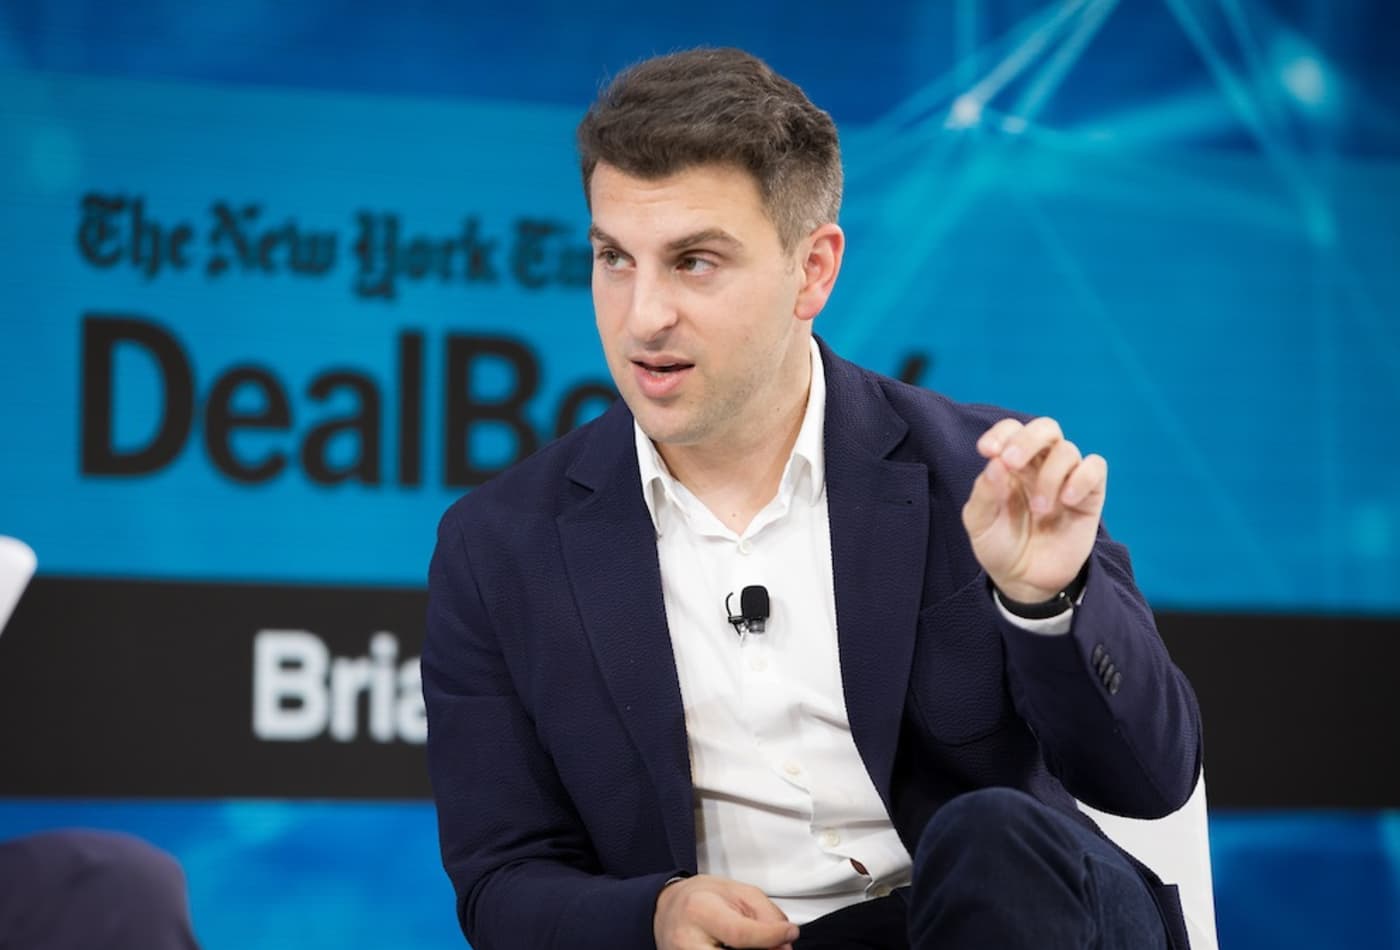 Airbnb CEO Brian Chesky: What caused WeWork's fall